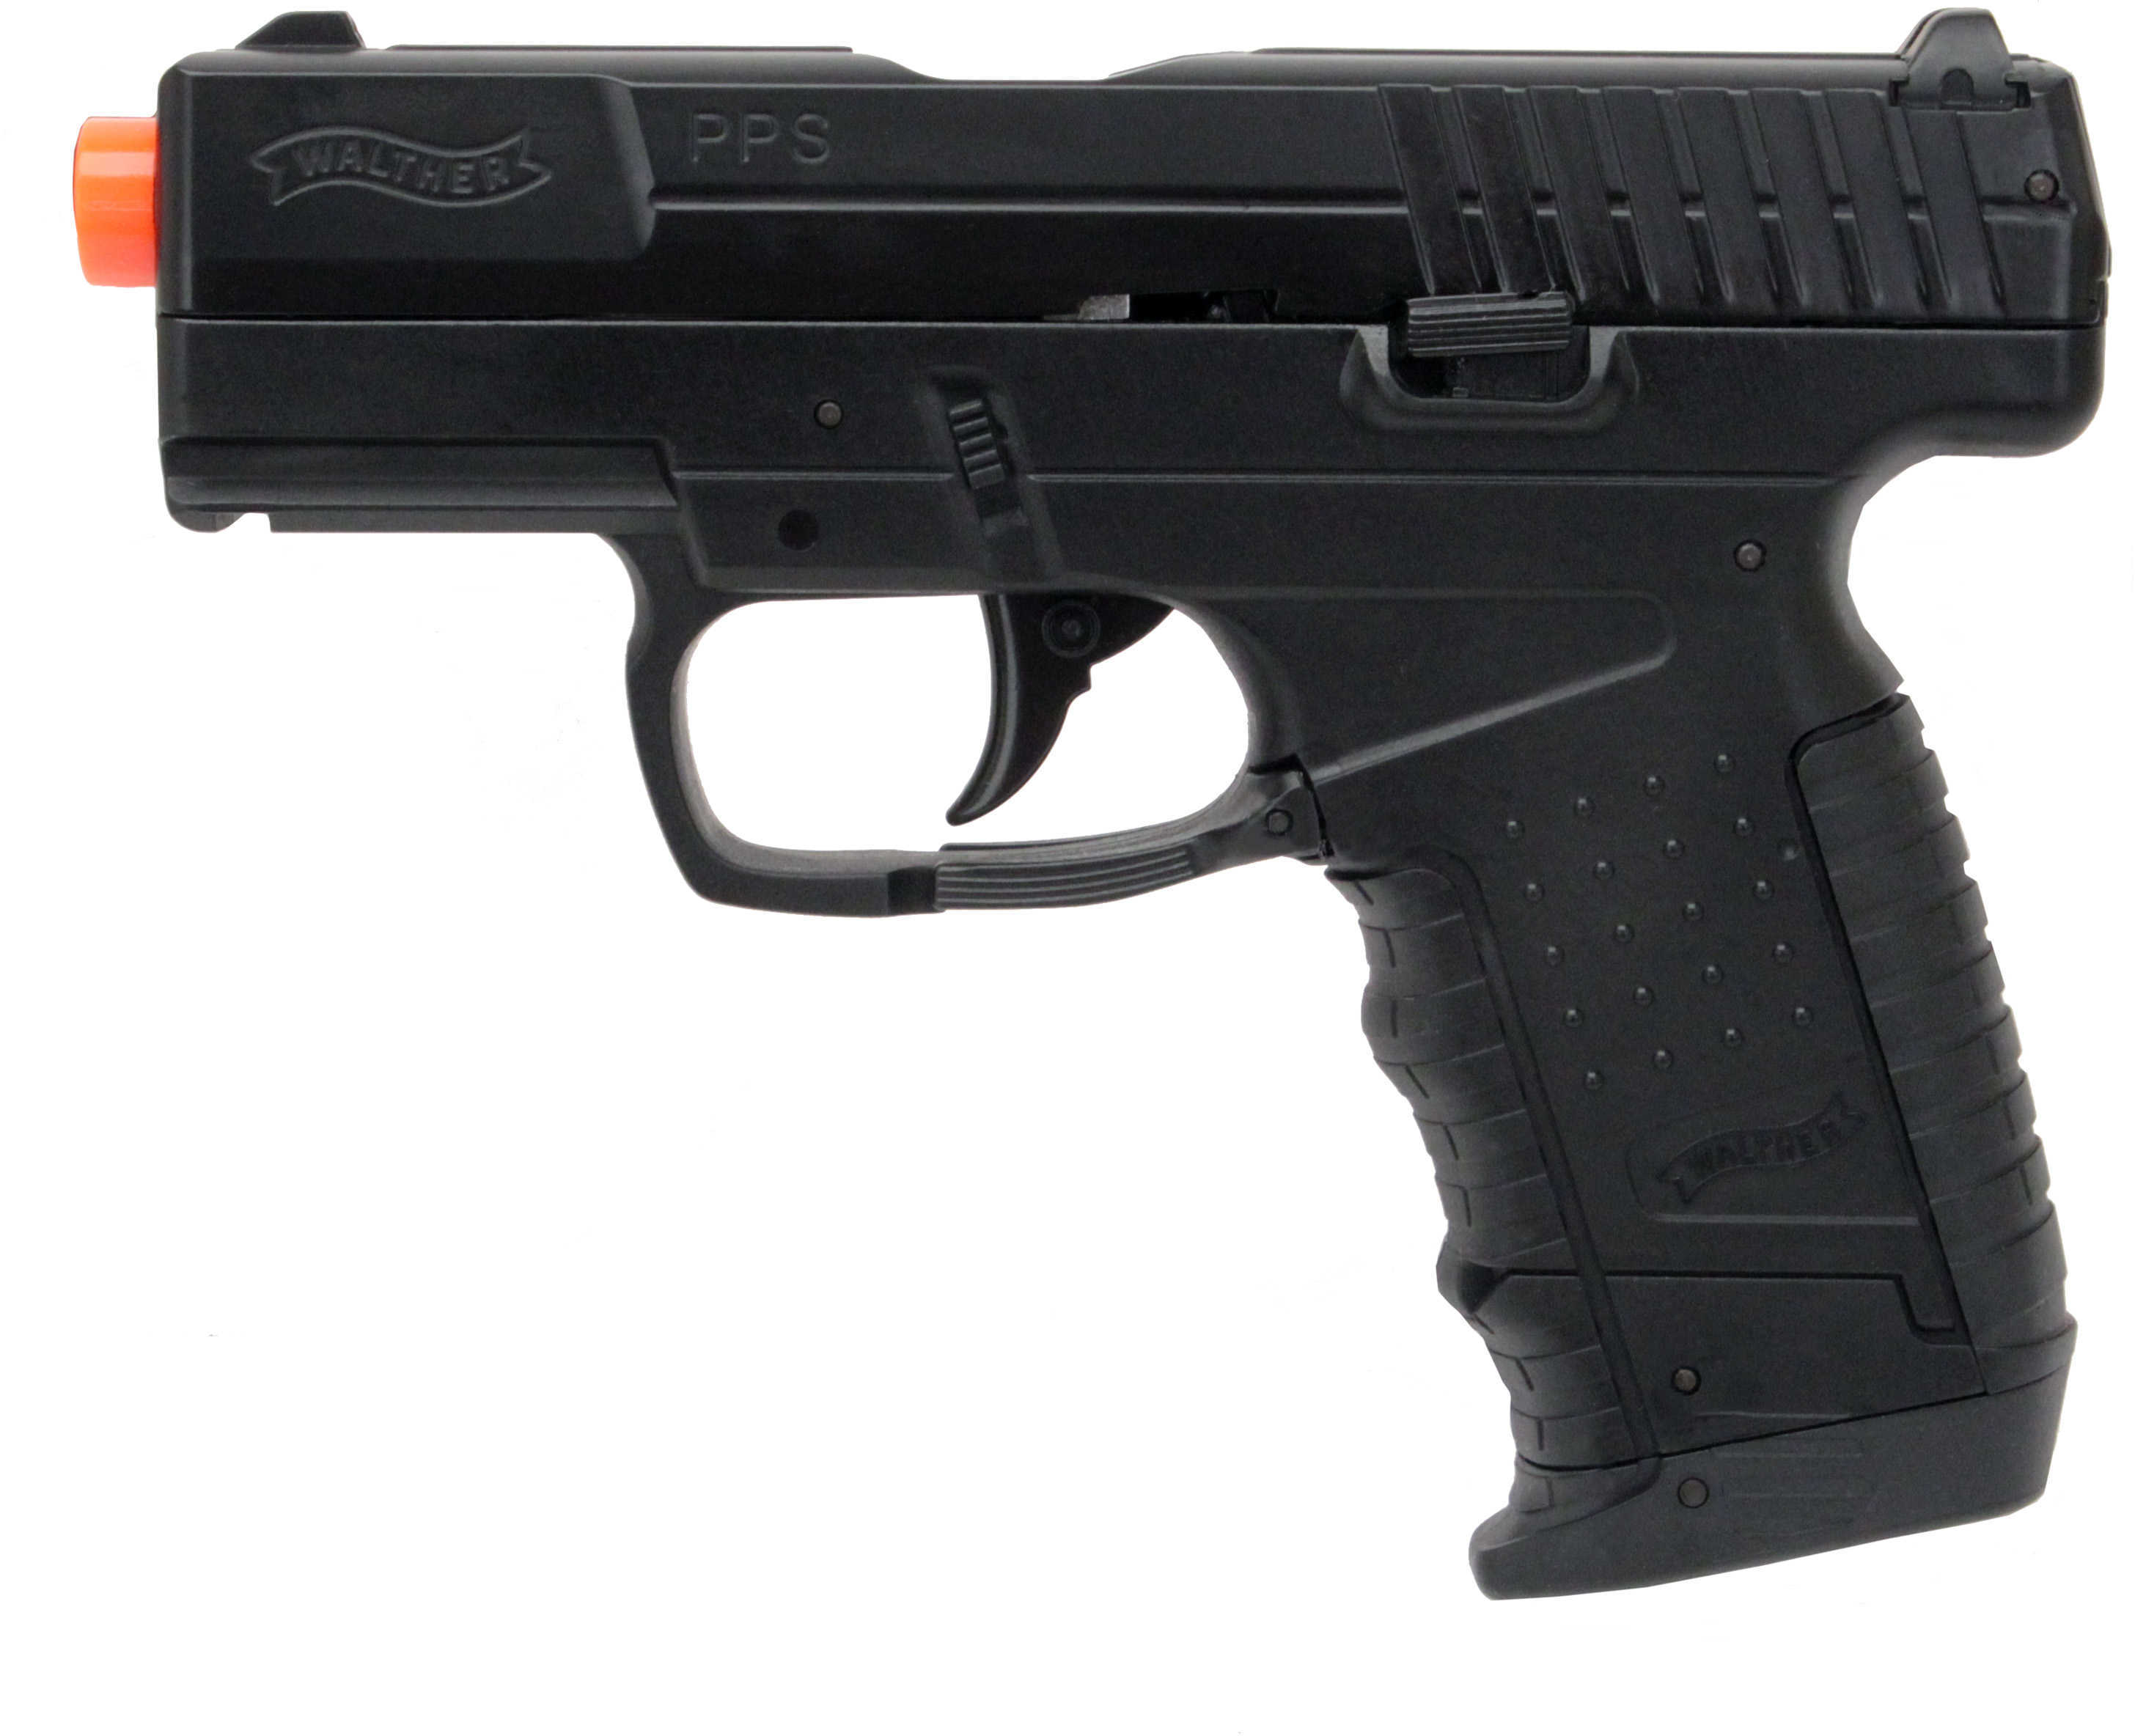 Umarex USA Walther CO2 Airsoft Pistol PPS Black Md: 2272804